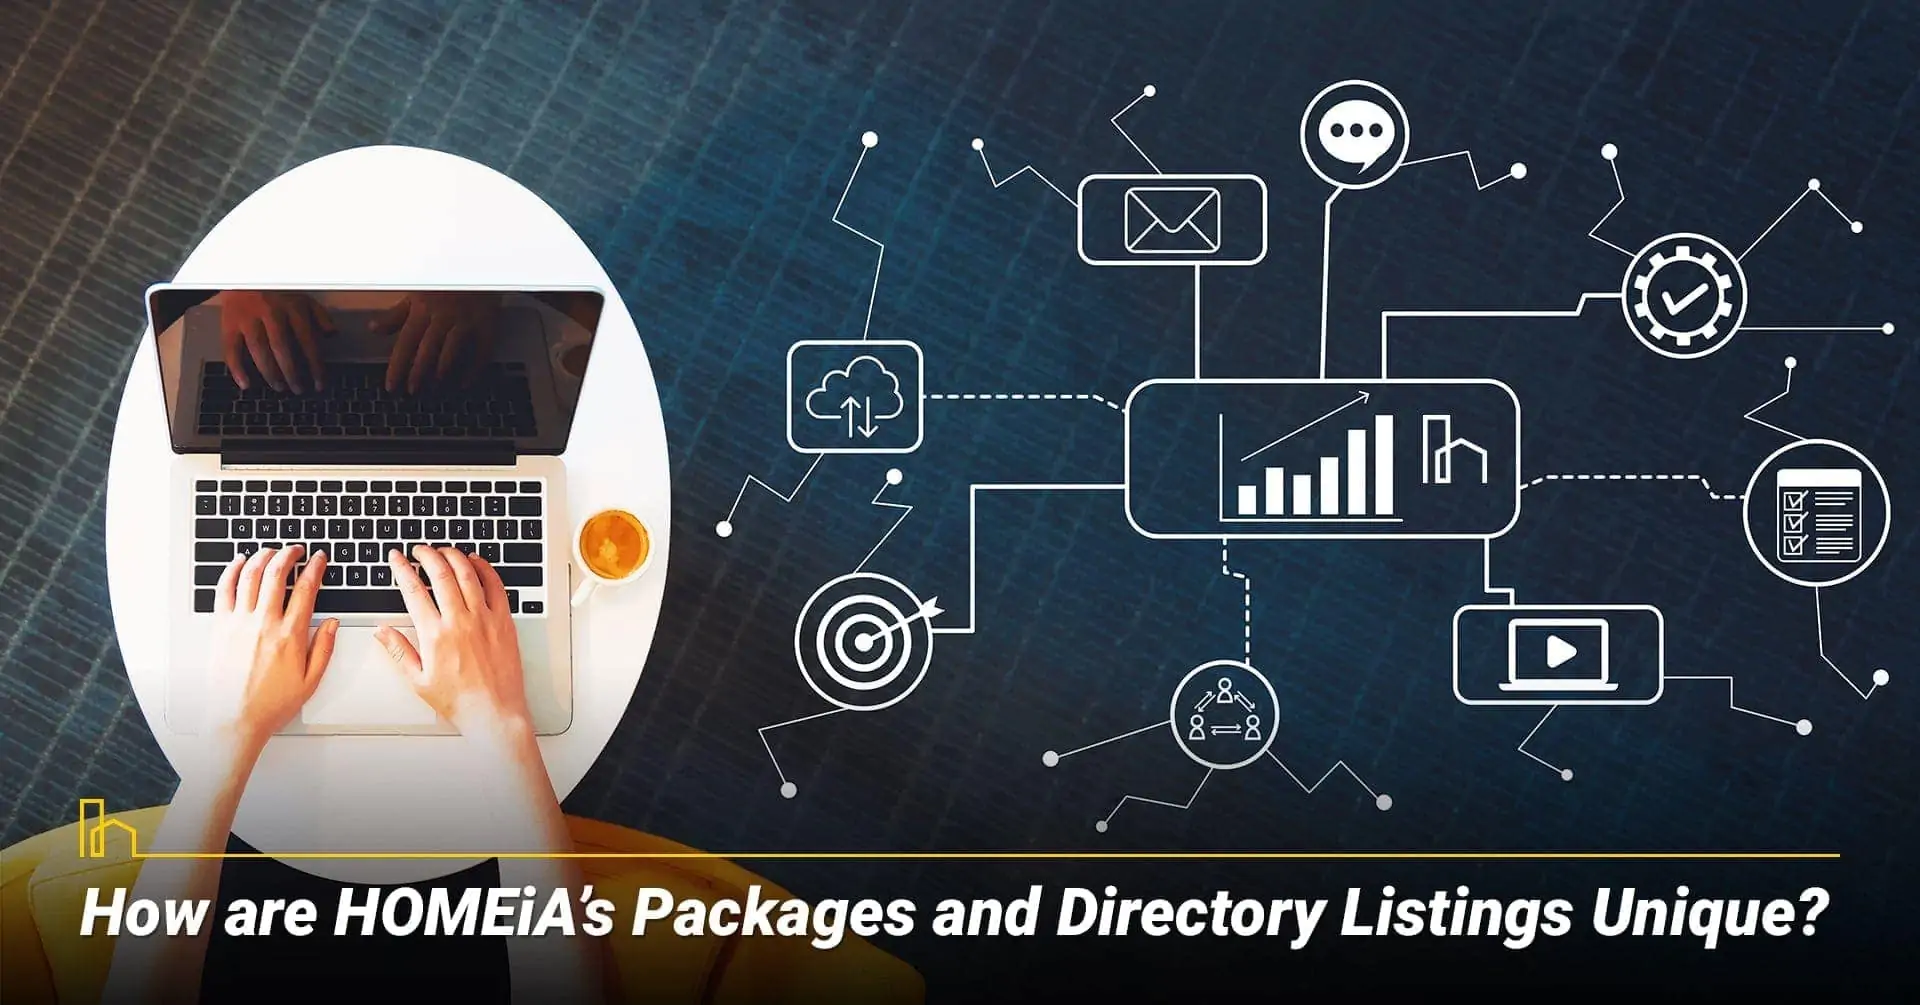 How are HOMEiA’s Packages and Directory Listings Unique? HOMEiA offers exceptional services